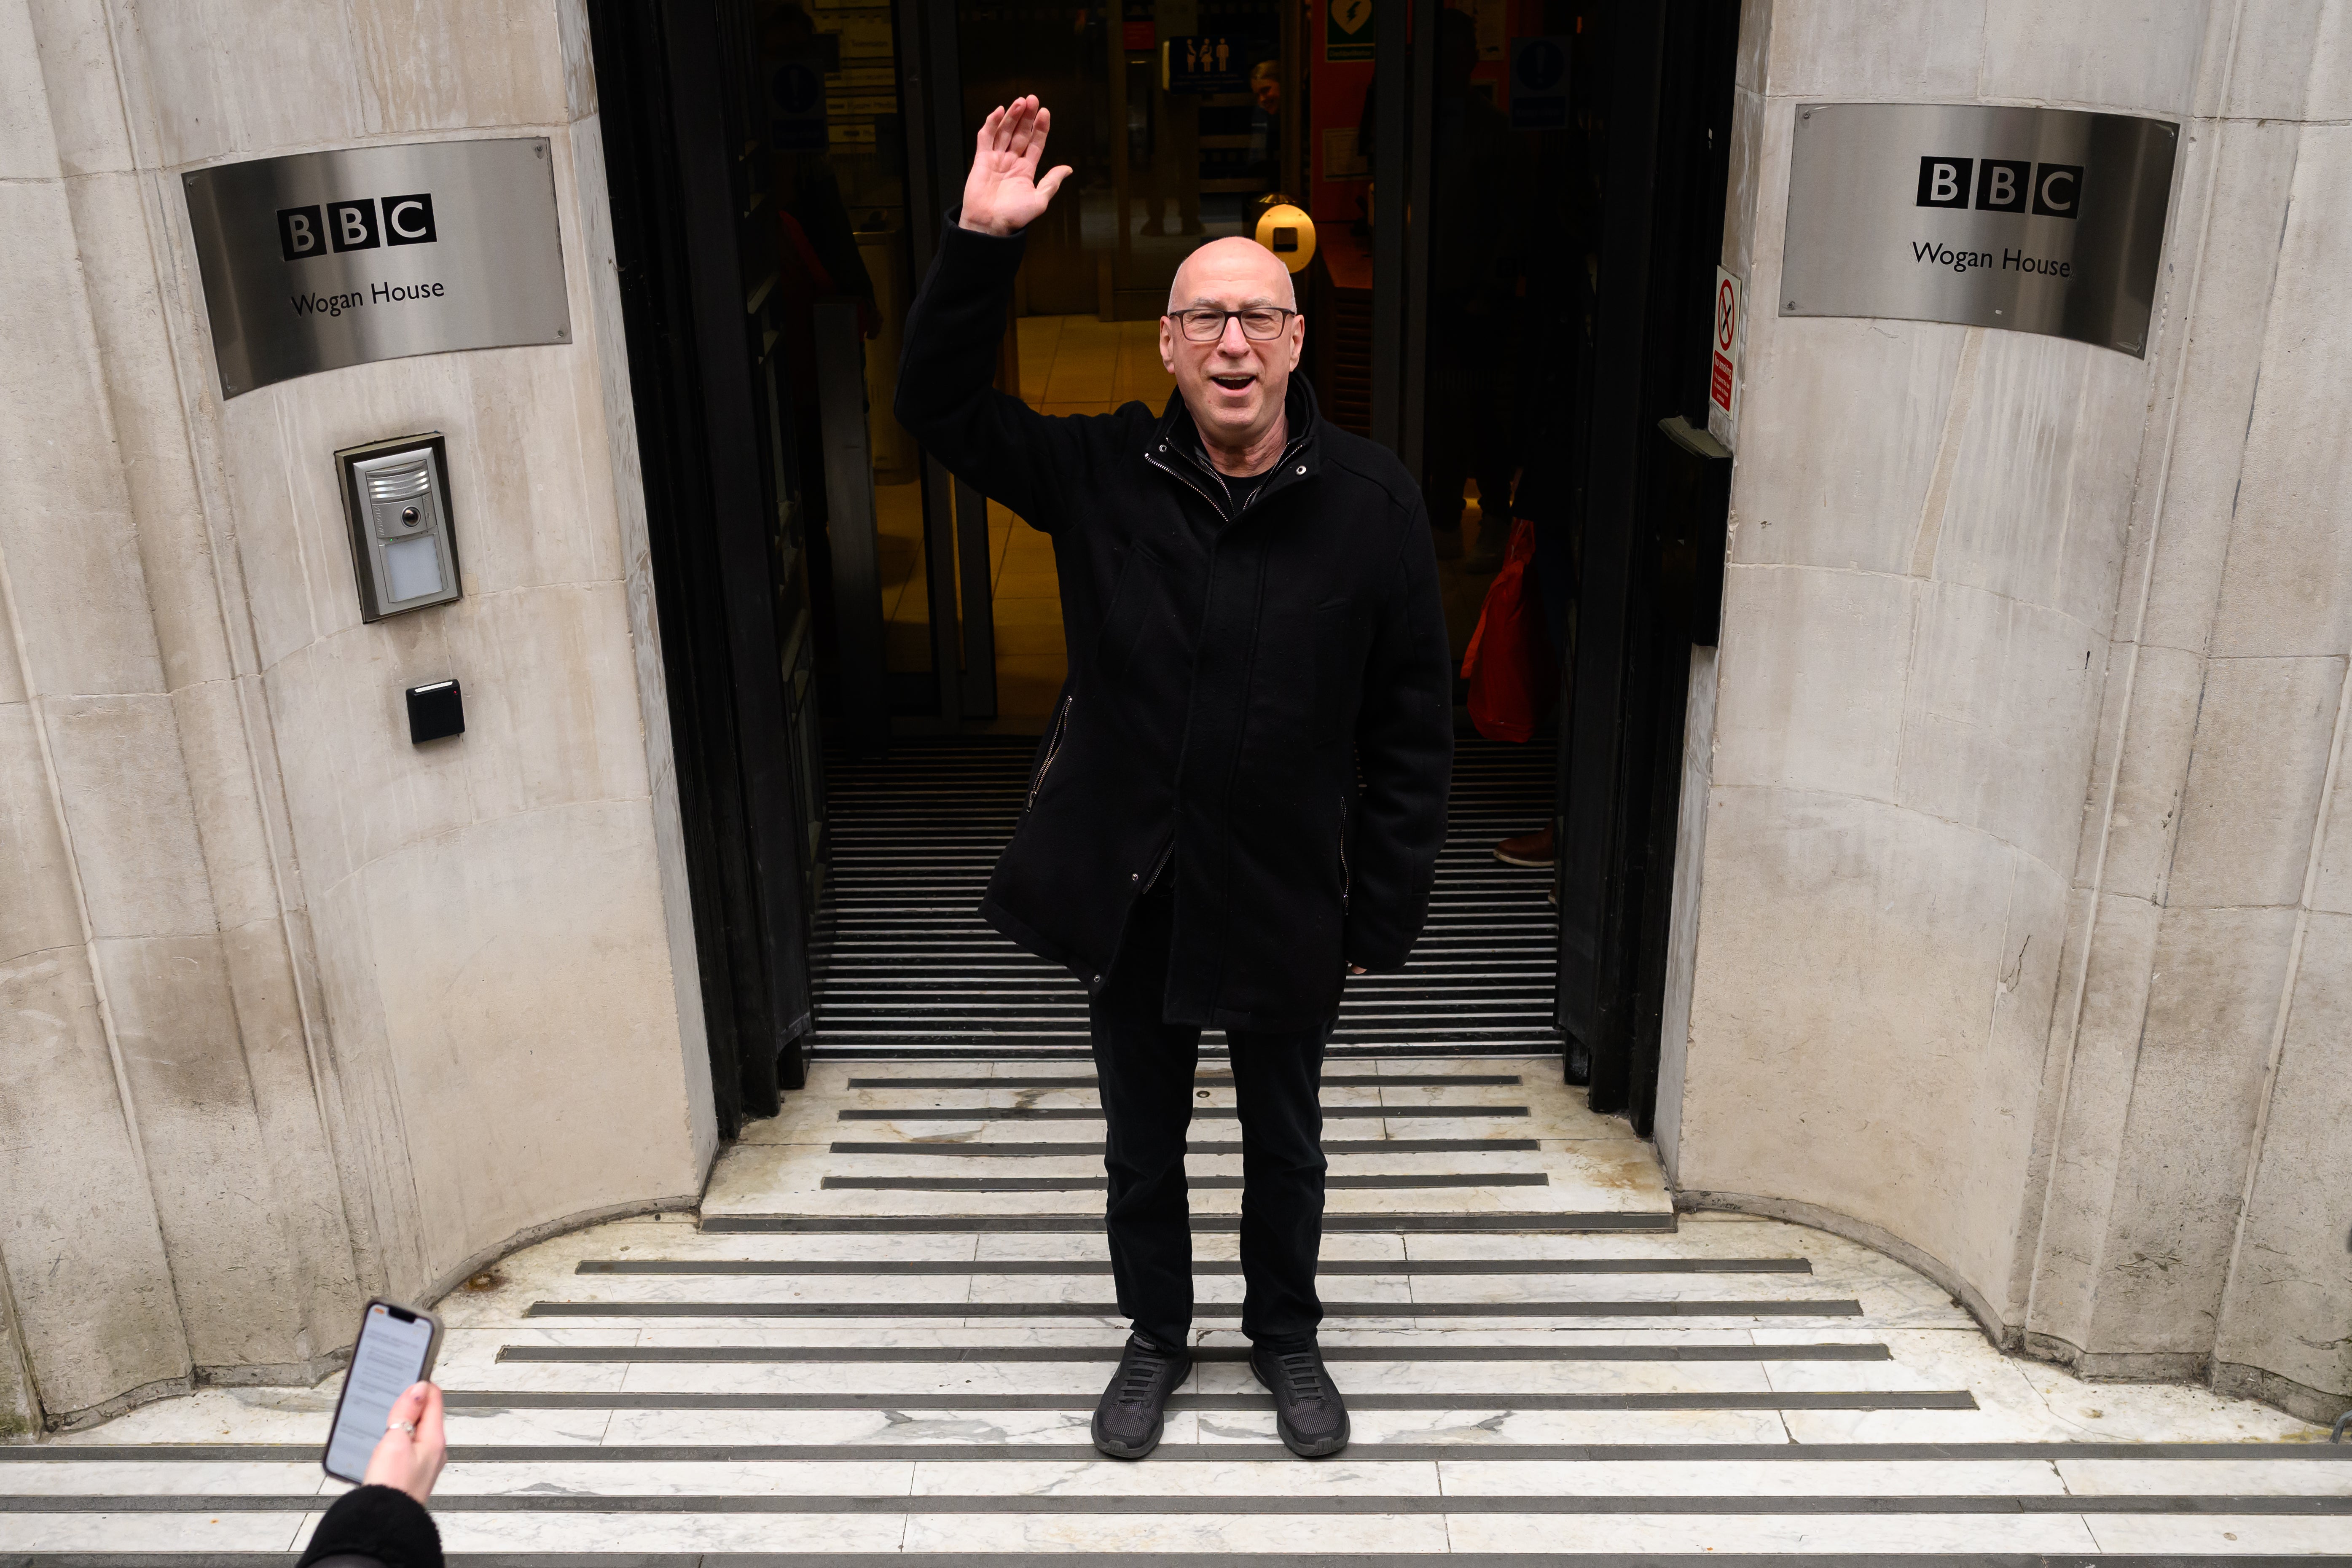 Bruce departed the BBC last week